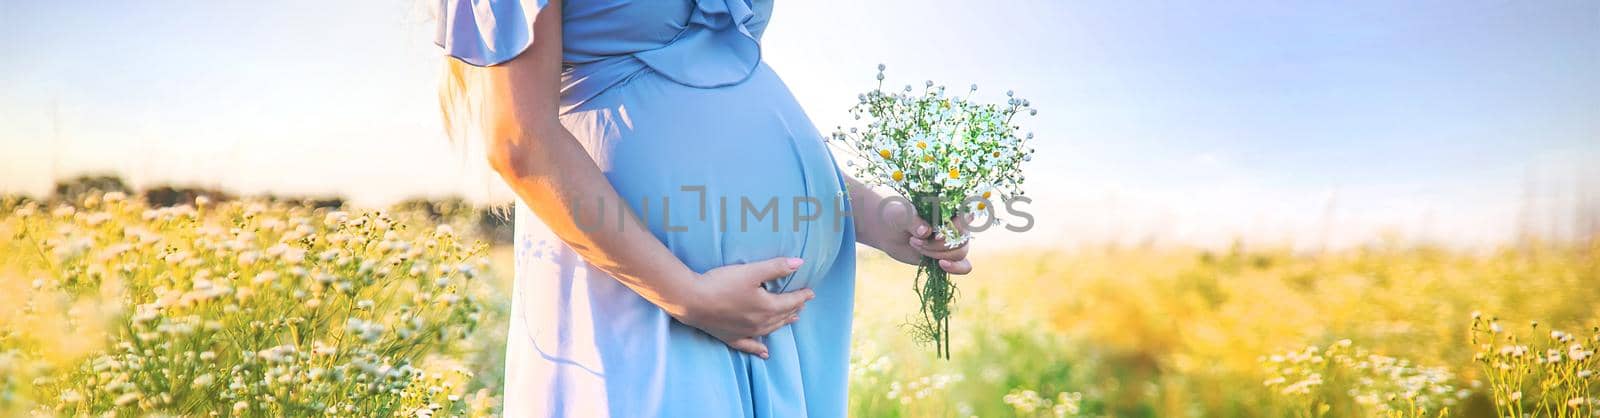 pregnant woman with camomiles in hands. Selective focus. nature.